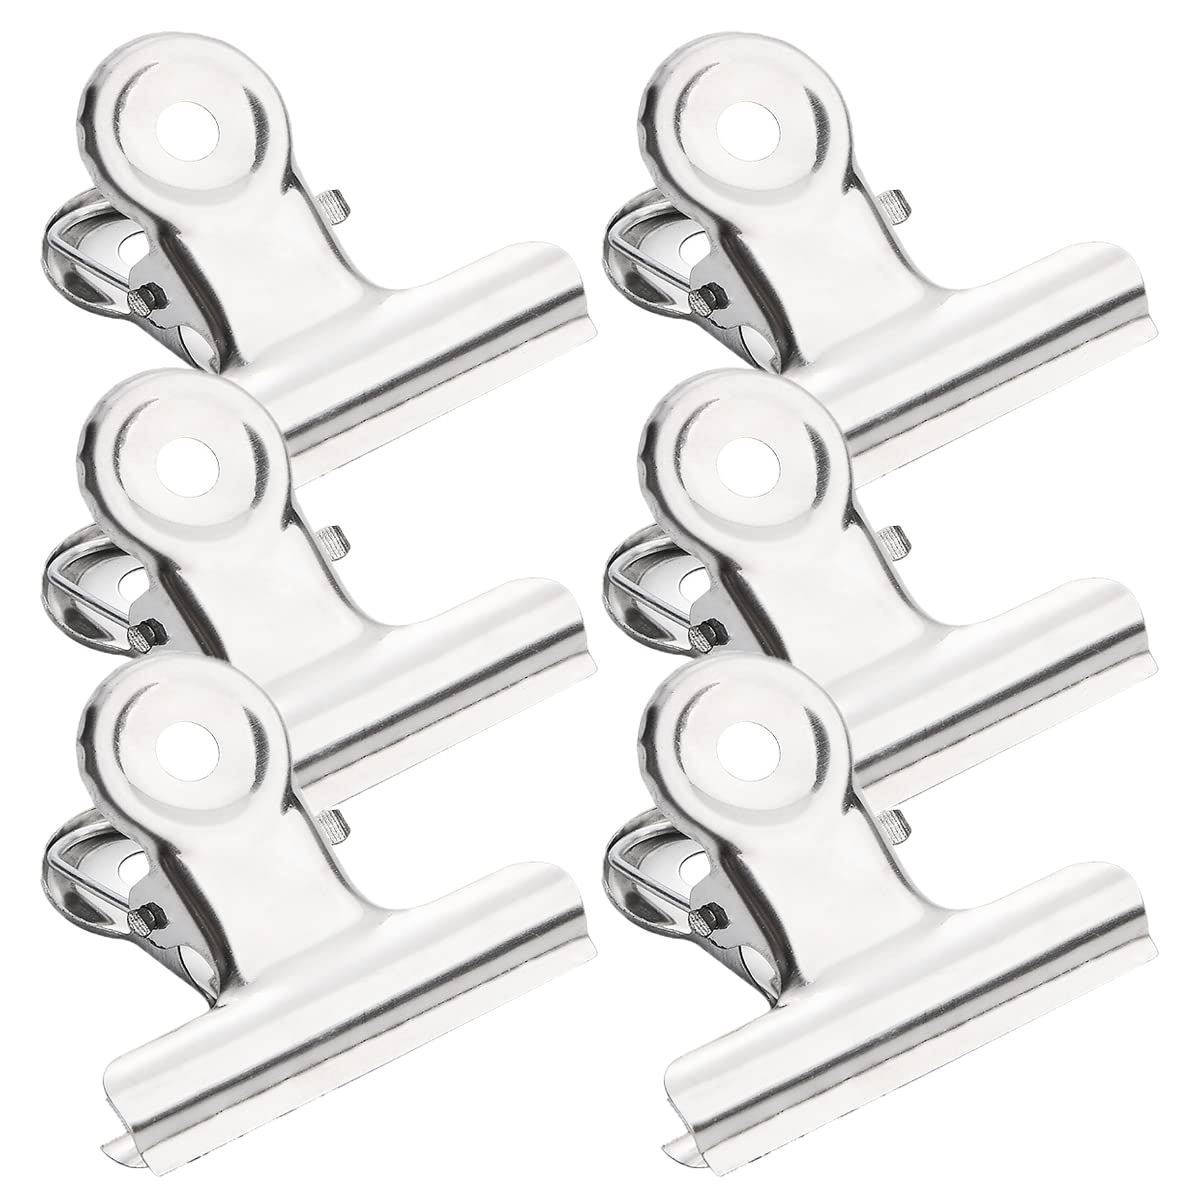 31 X 6 PACK BULL HINGE CLIPS STAINLESS STEEL BINDER PAPER CLAMPS METAL GRIP CLIP CLAMPS FOR PHOTOS PICTURES PAPERS, FOOD BAGS, ART & CRAFTS, OFFICE AND SCHOOL SUPPLIES - TOTAL RRP £180: LOCATION - RA